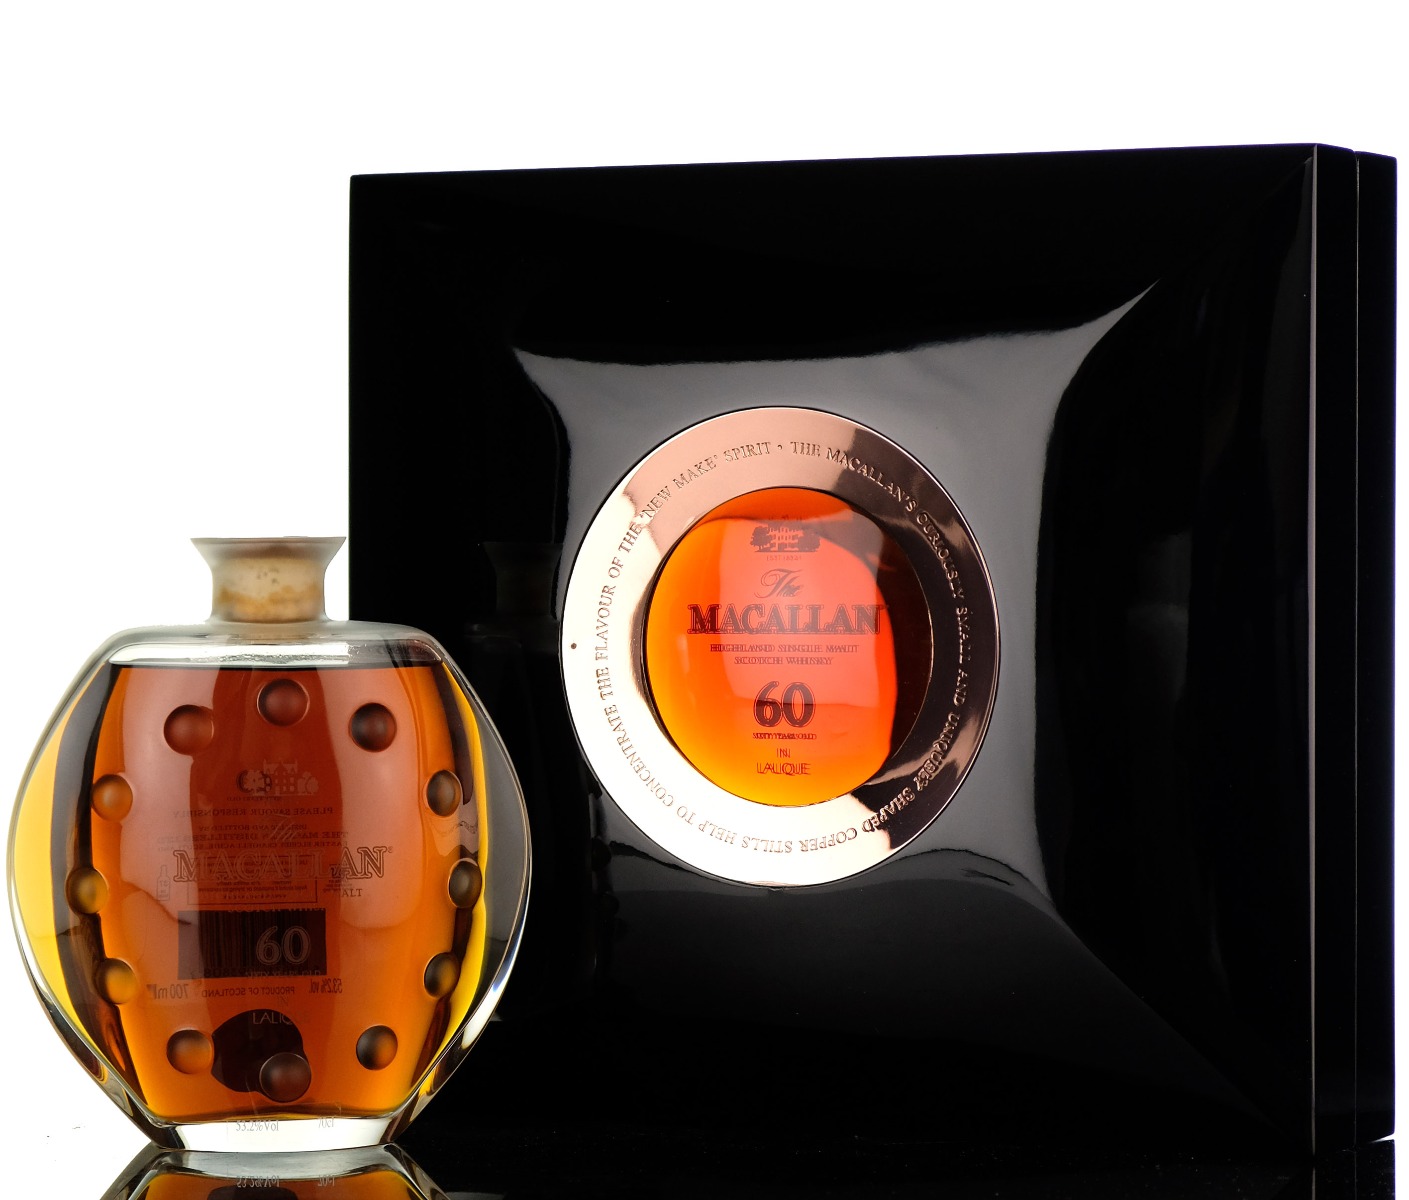 MACALLAN 60 YEAR OLD - LALIQUE